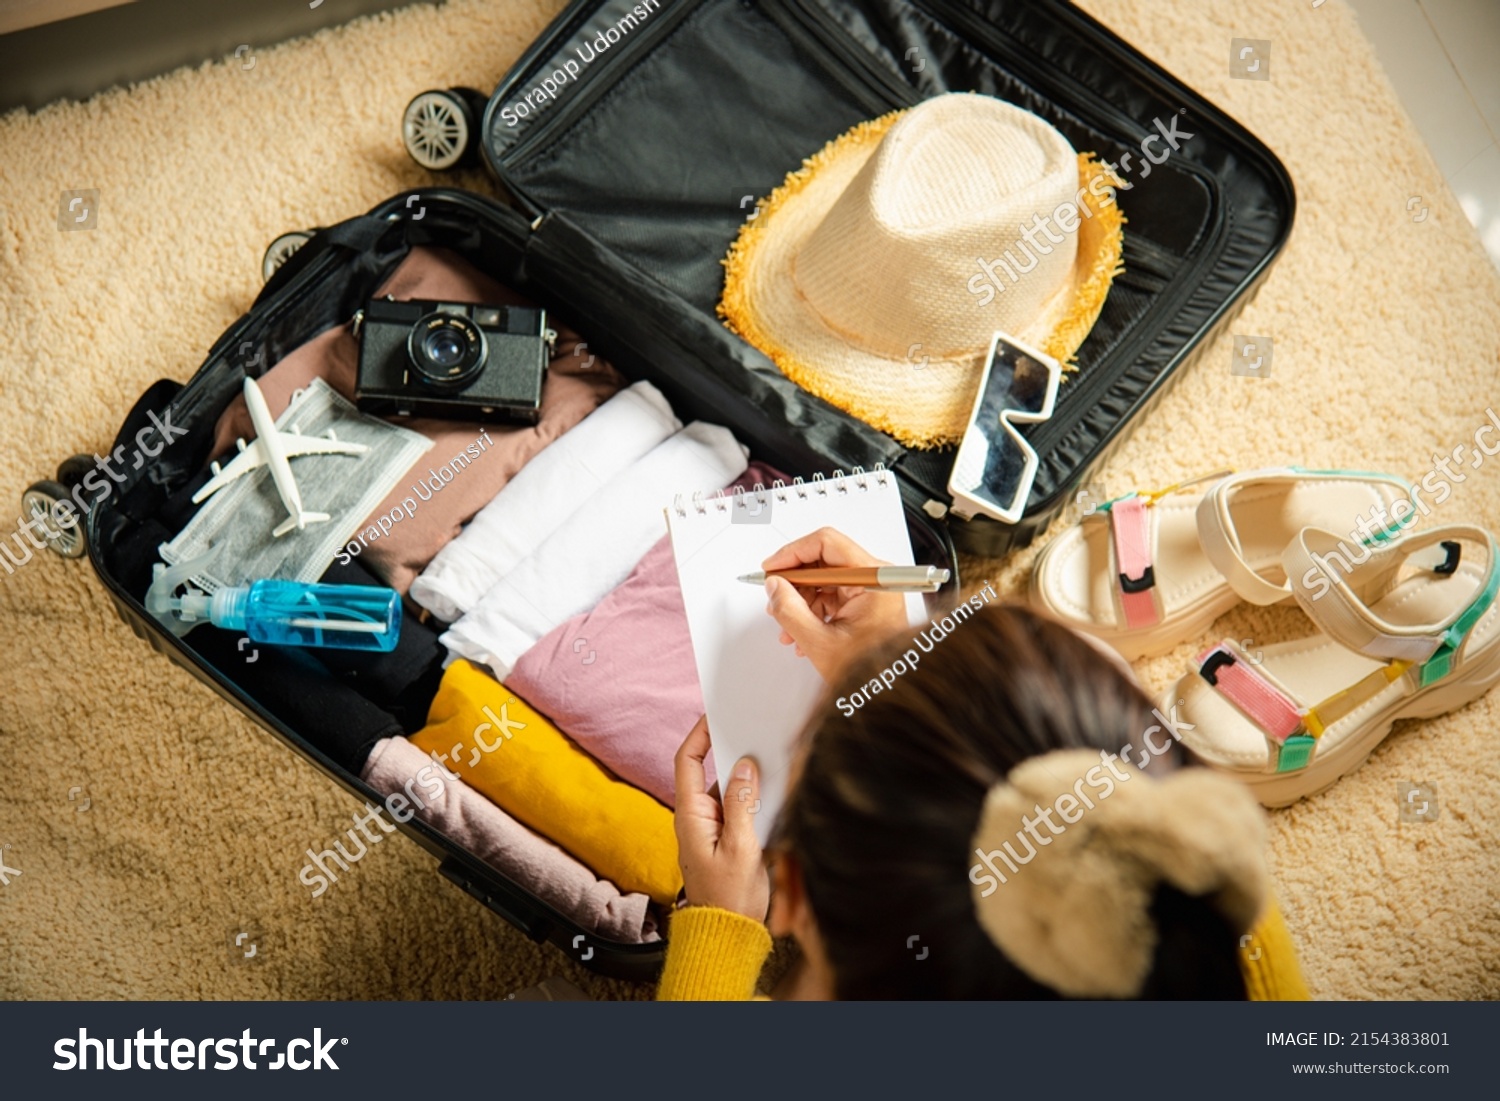 Making check list of things to pack for travel. Woman writing paper take note and packing suitcase to vacation writing paper list sitting on room, prepare clothes into luggage, Travel vacation travel #2154383801